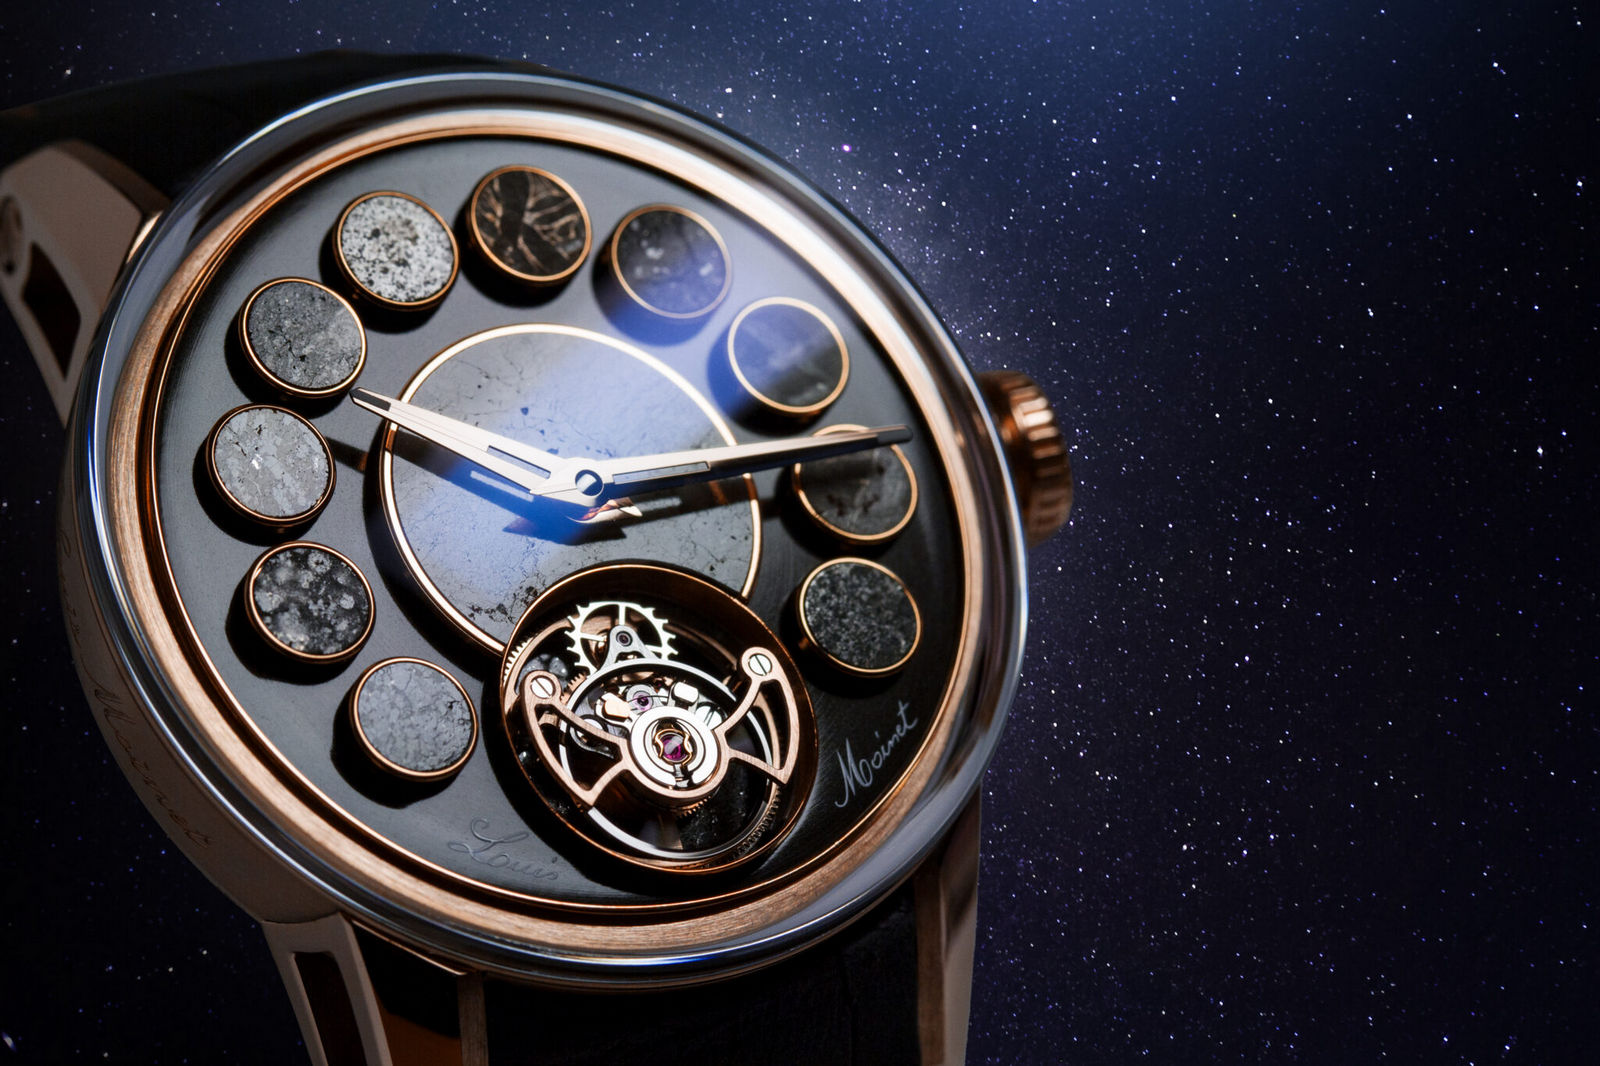 This $45,000 Louis Moinet Watch Contains the Oldest Whisky in the